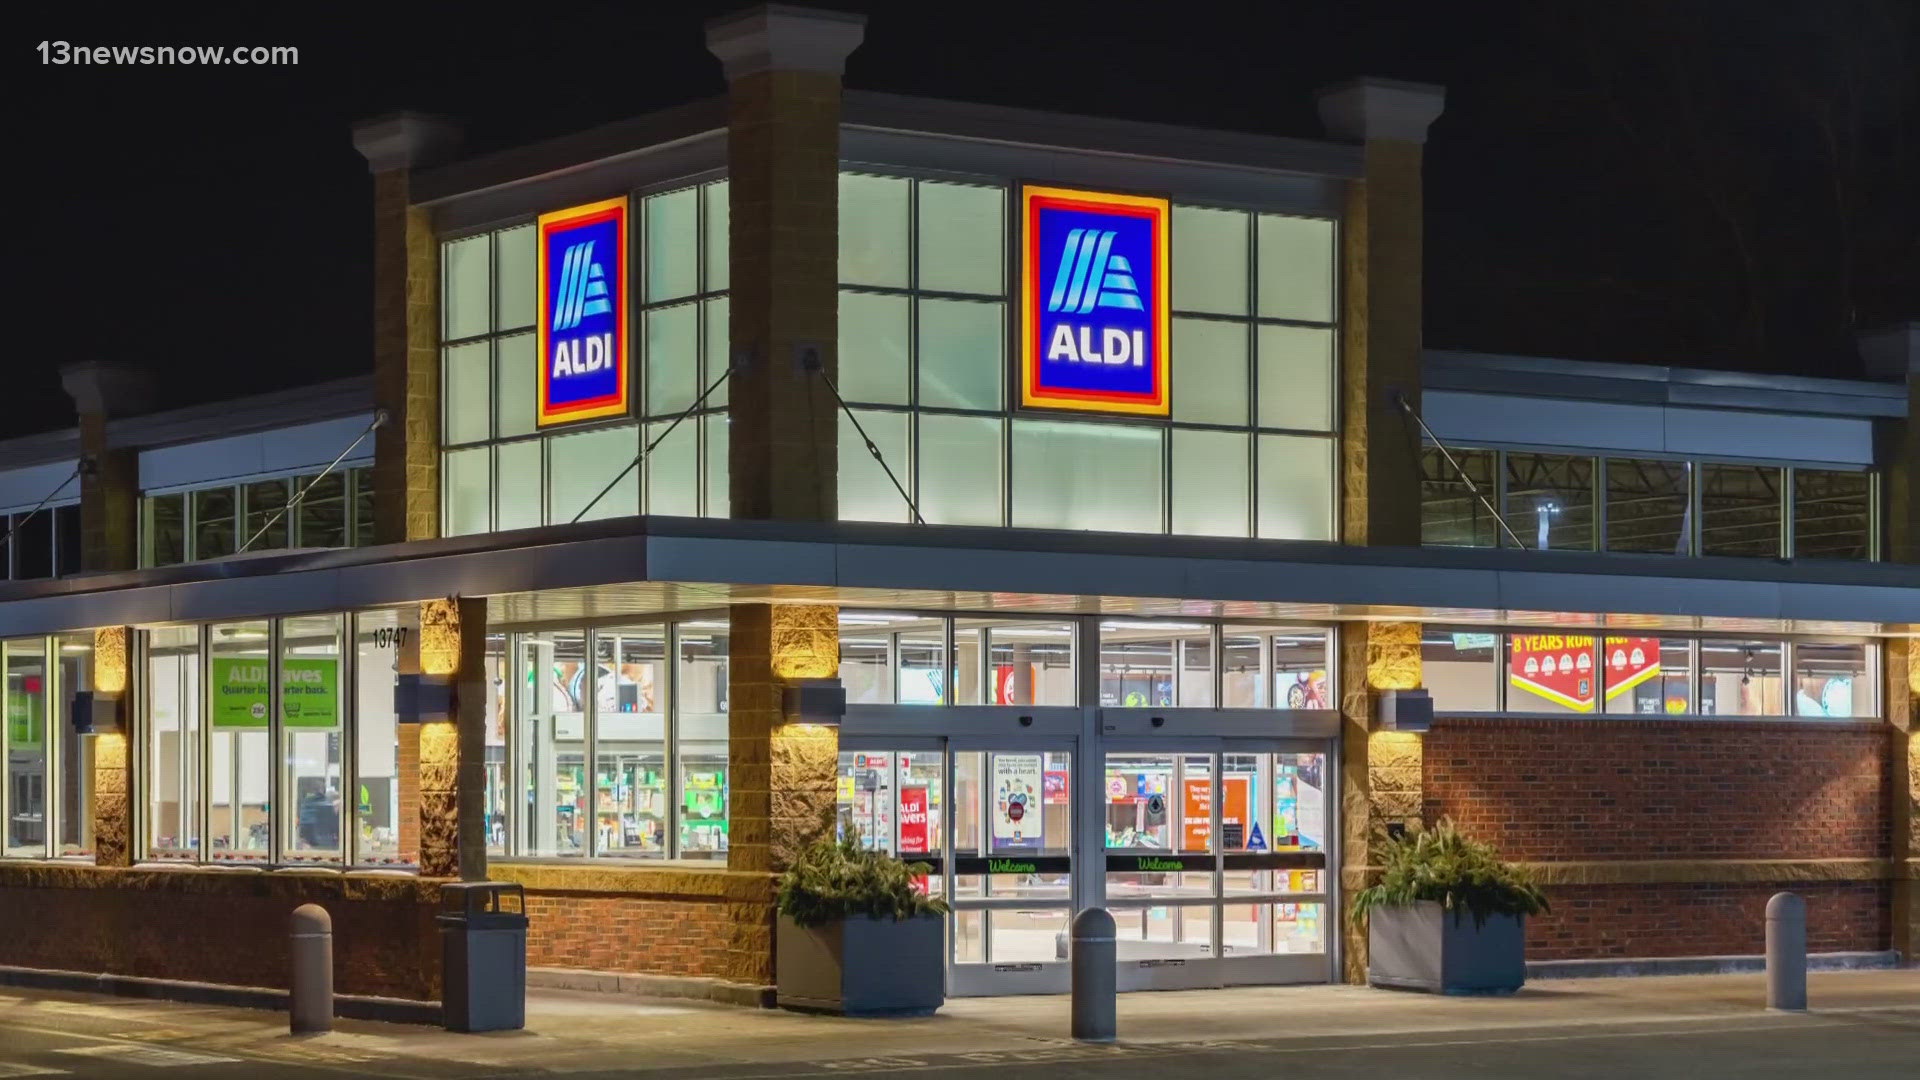 Aldi is dropping its "everyday low prices" on more than 250 items. It's part of the store's plan to pass along $100 million in savings through Labor Day.